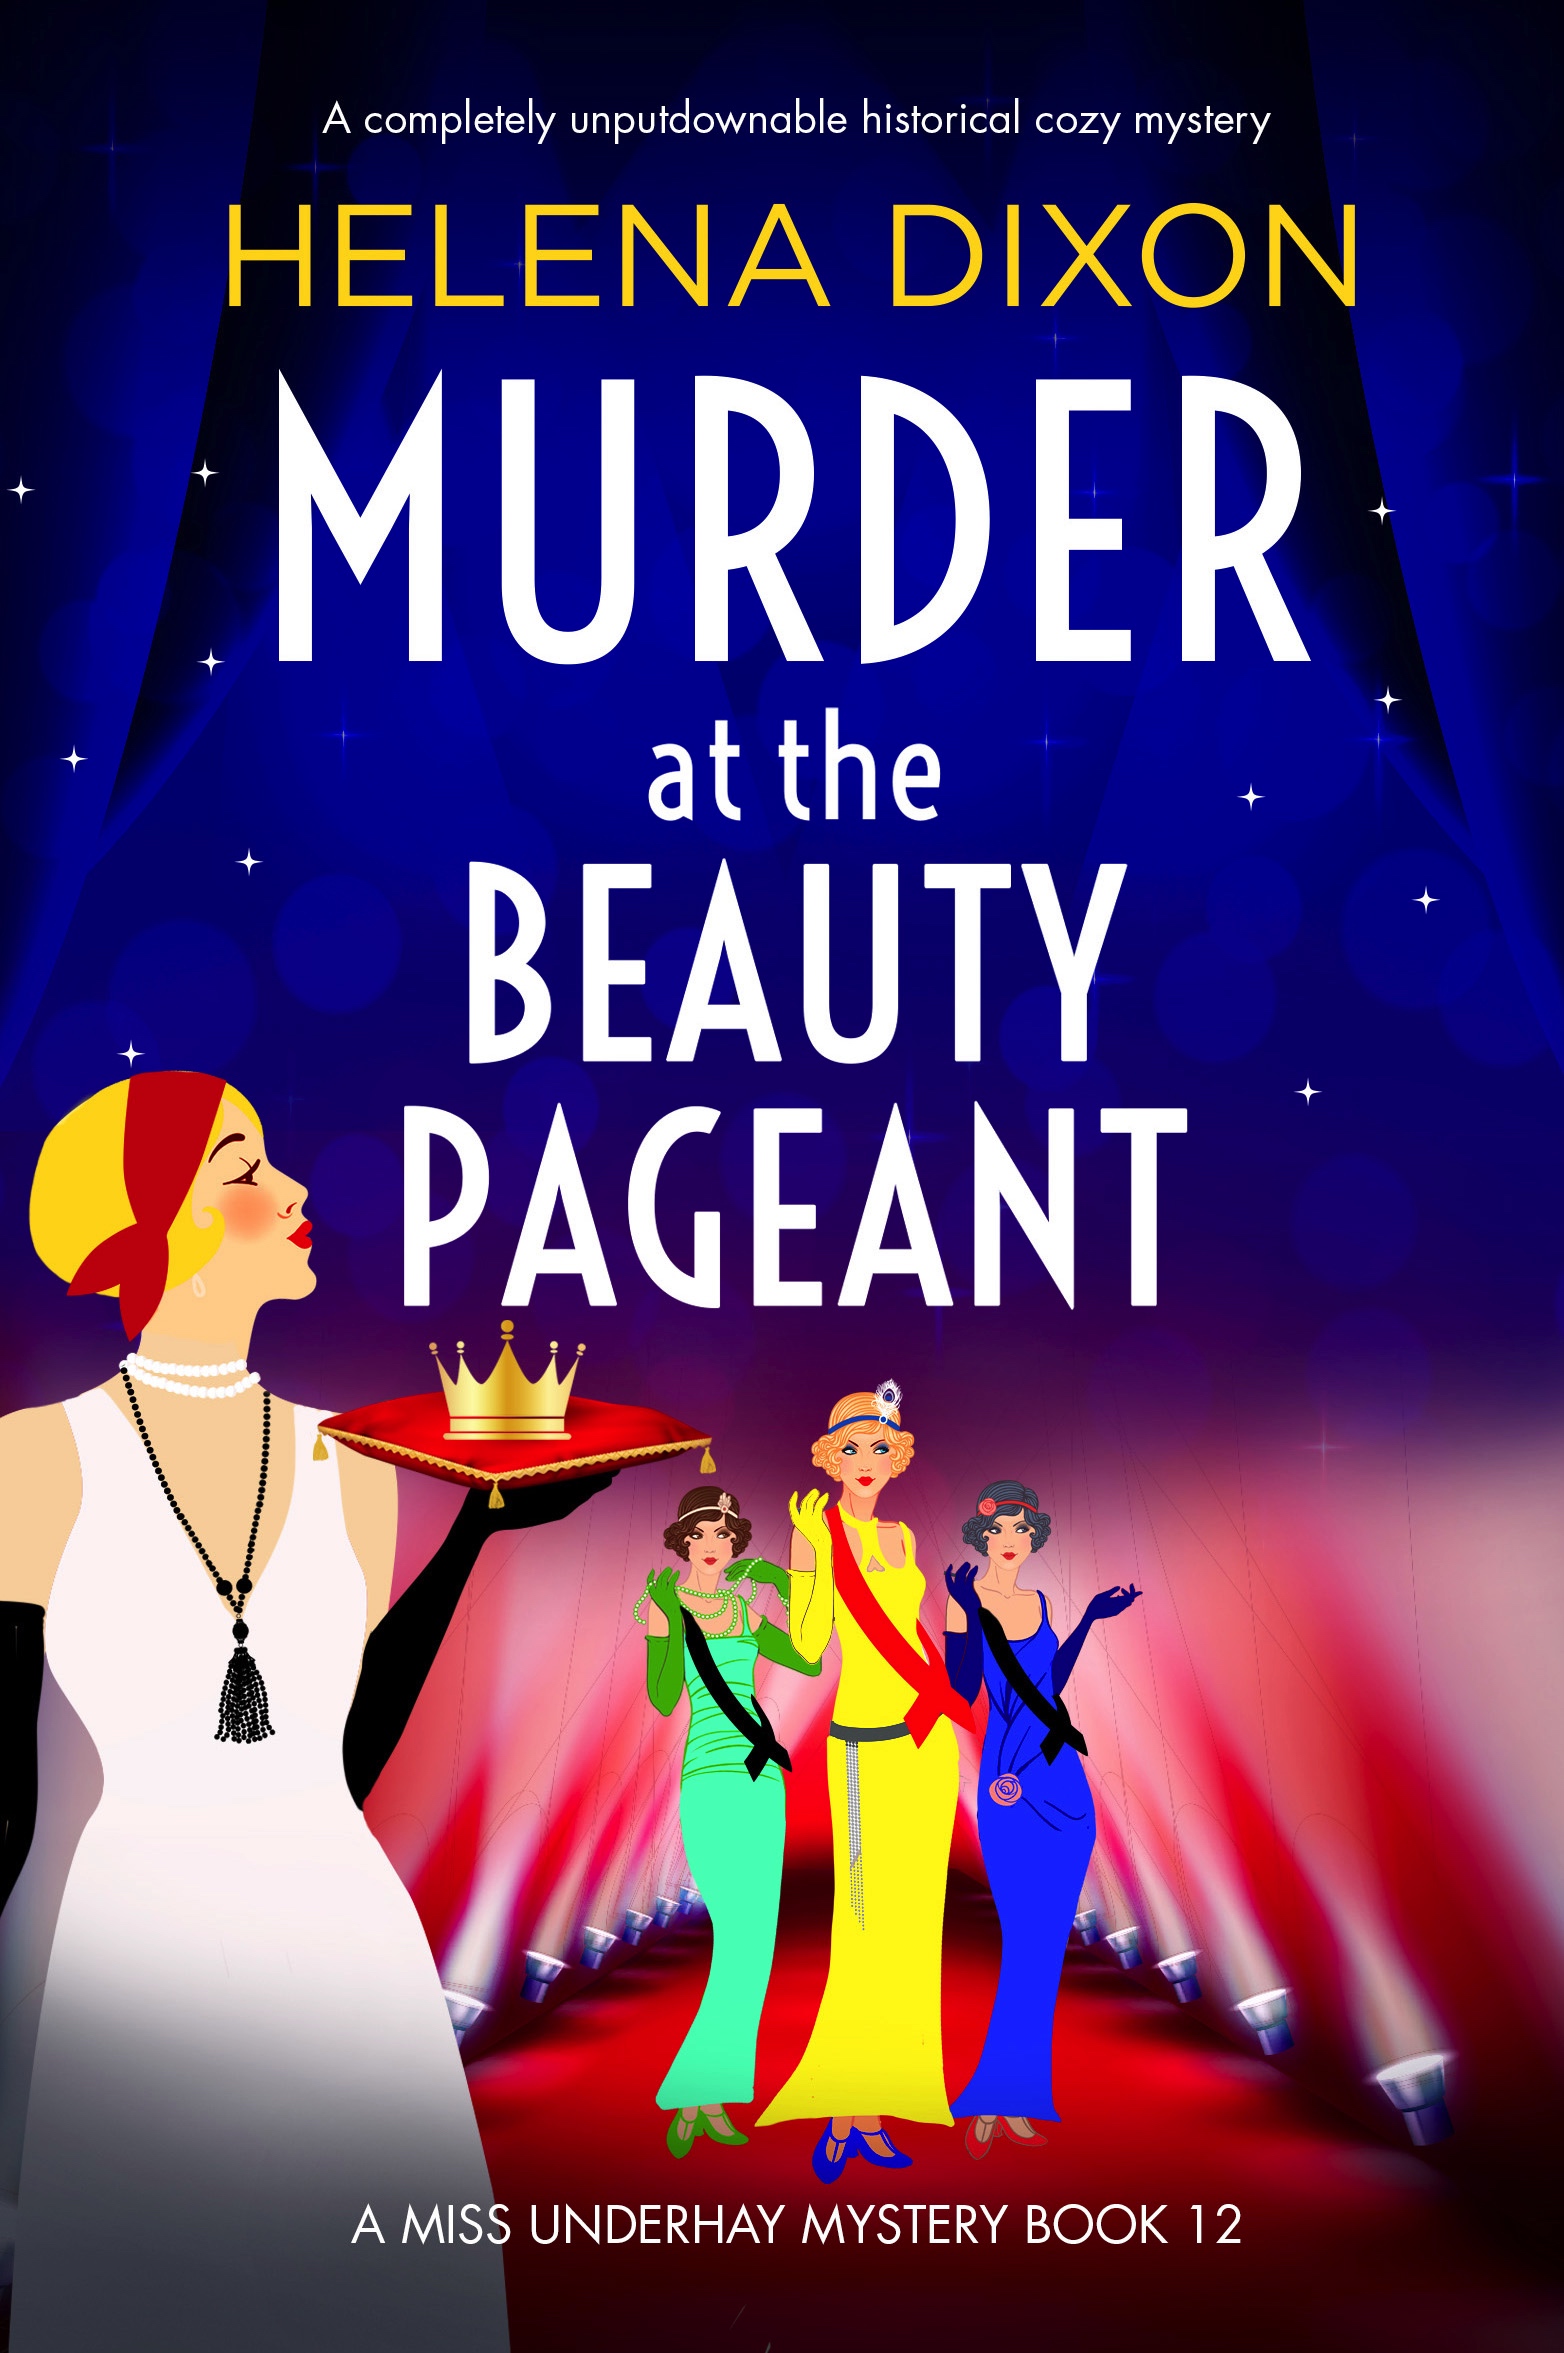 Murder at the Beauty Pageant book cover